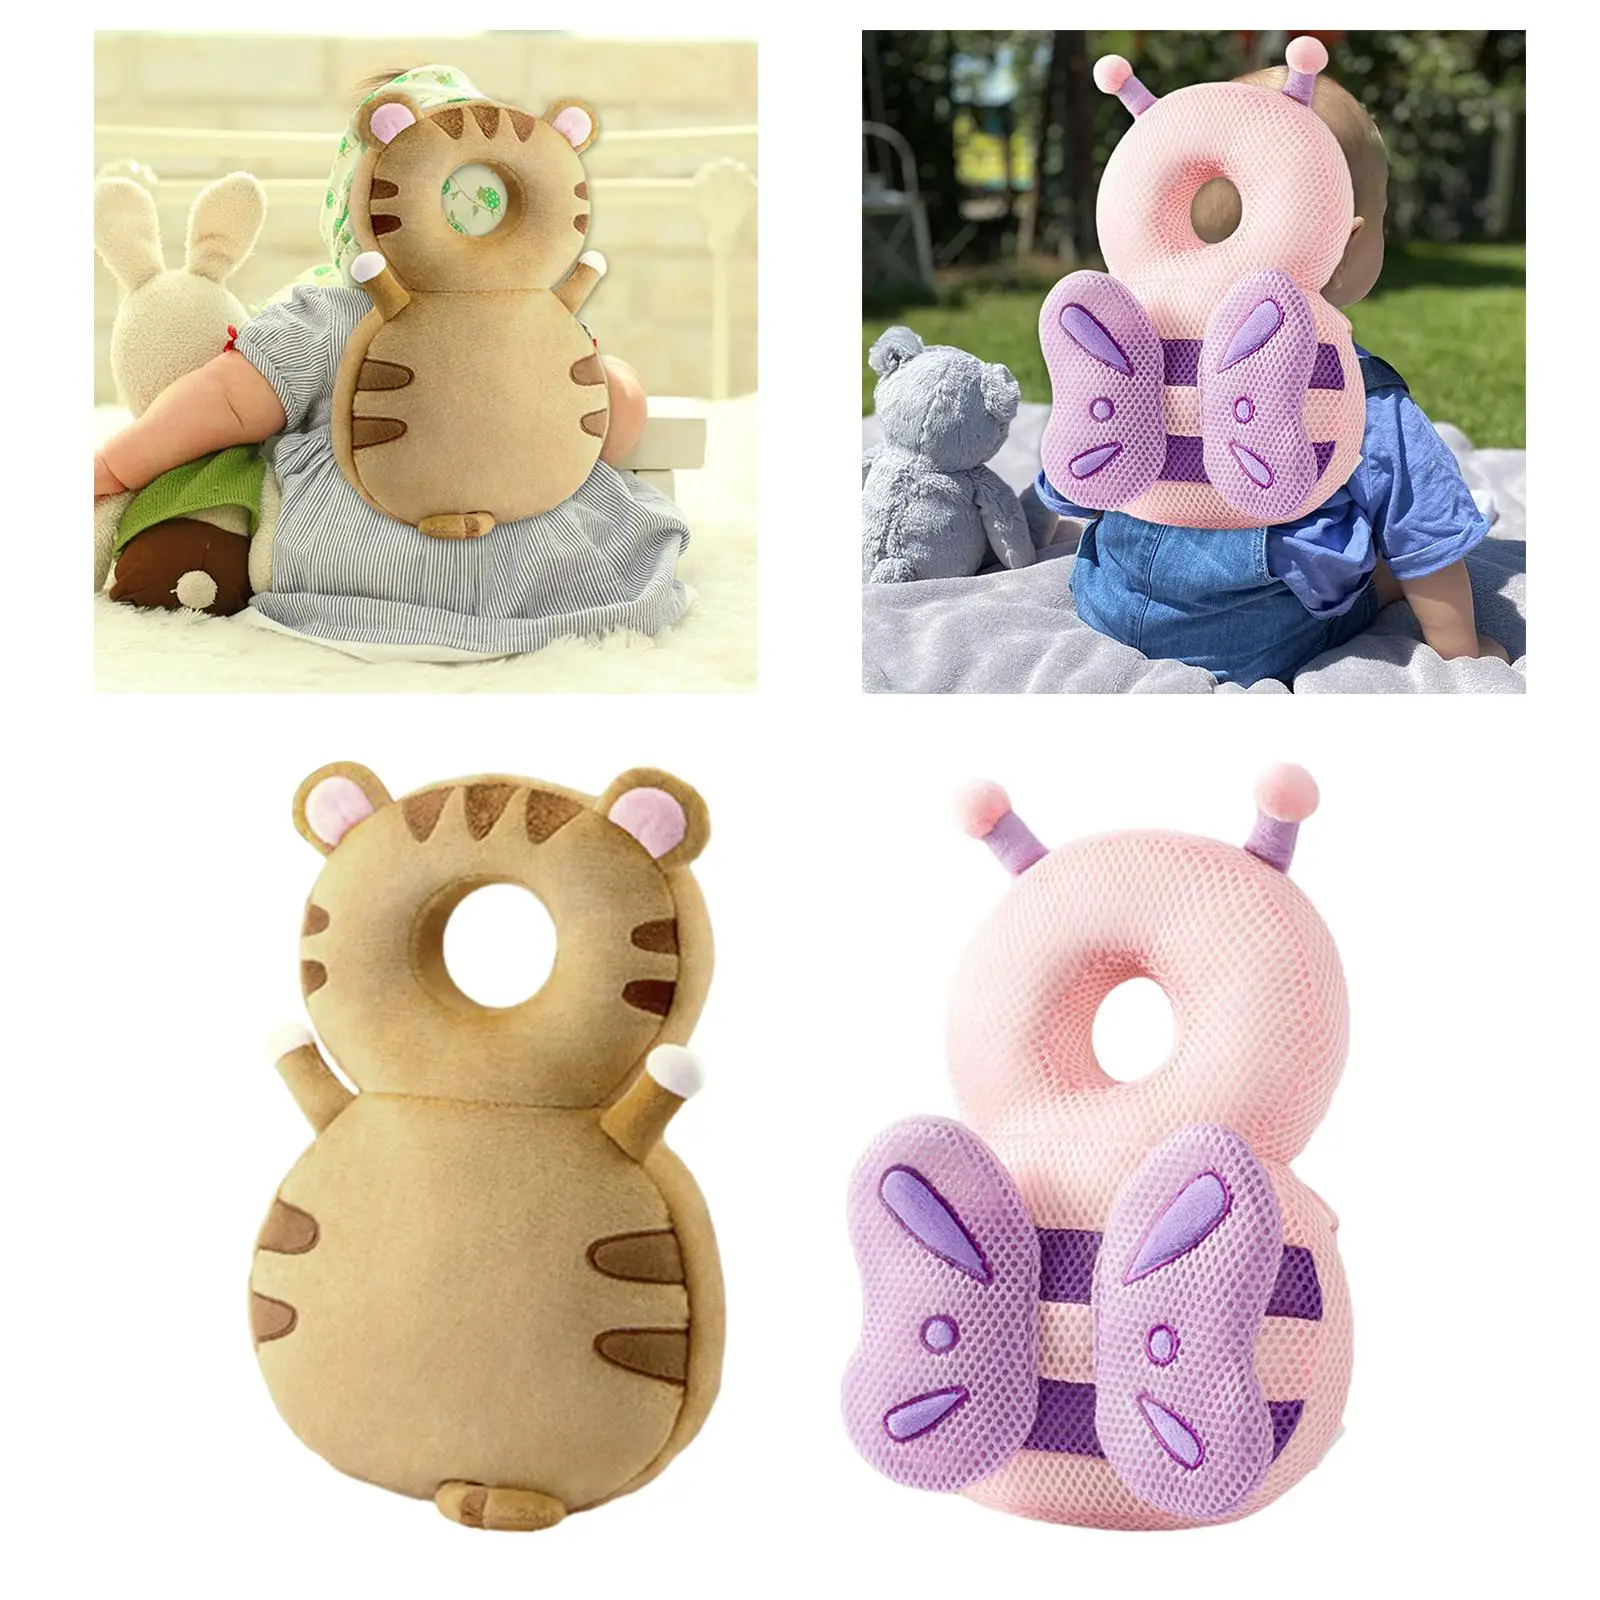 Baby Walker Head Protector Portable Soft Headrest Cute Baby Head Protection Cushion for Walking Crawling Infant Kids Children